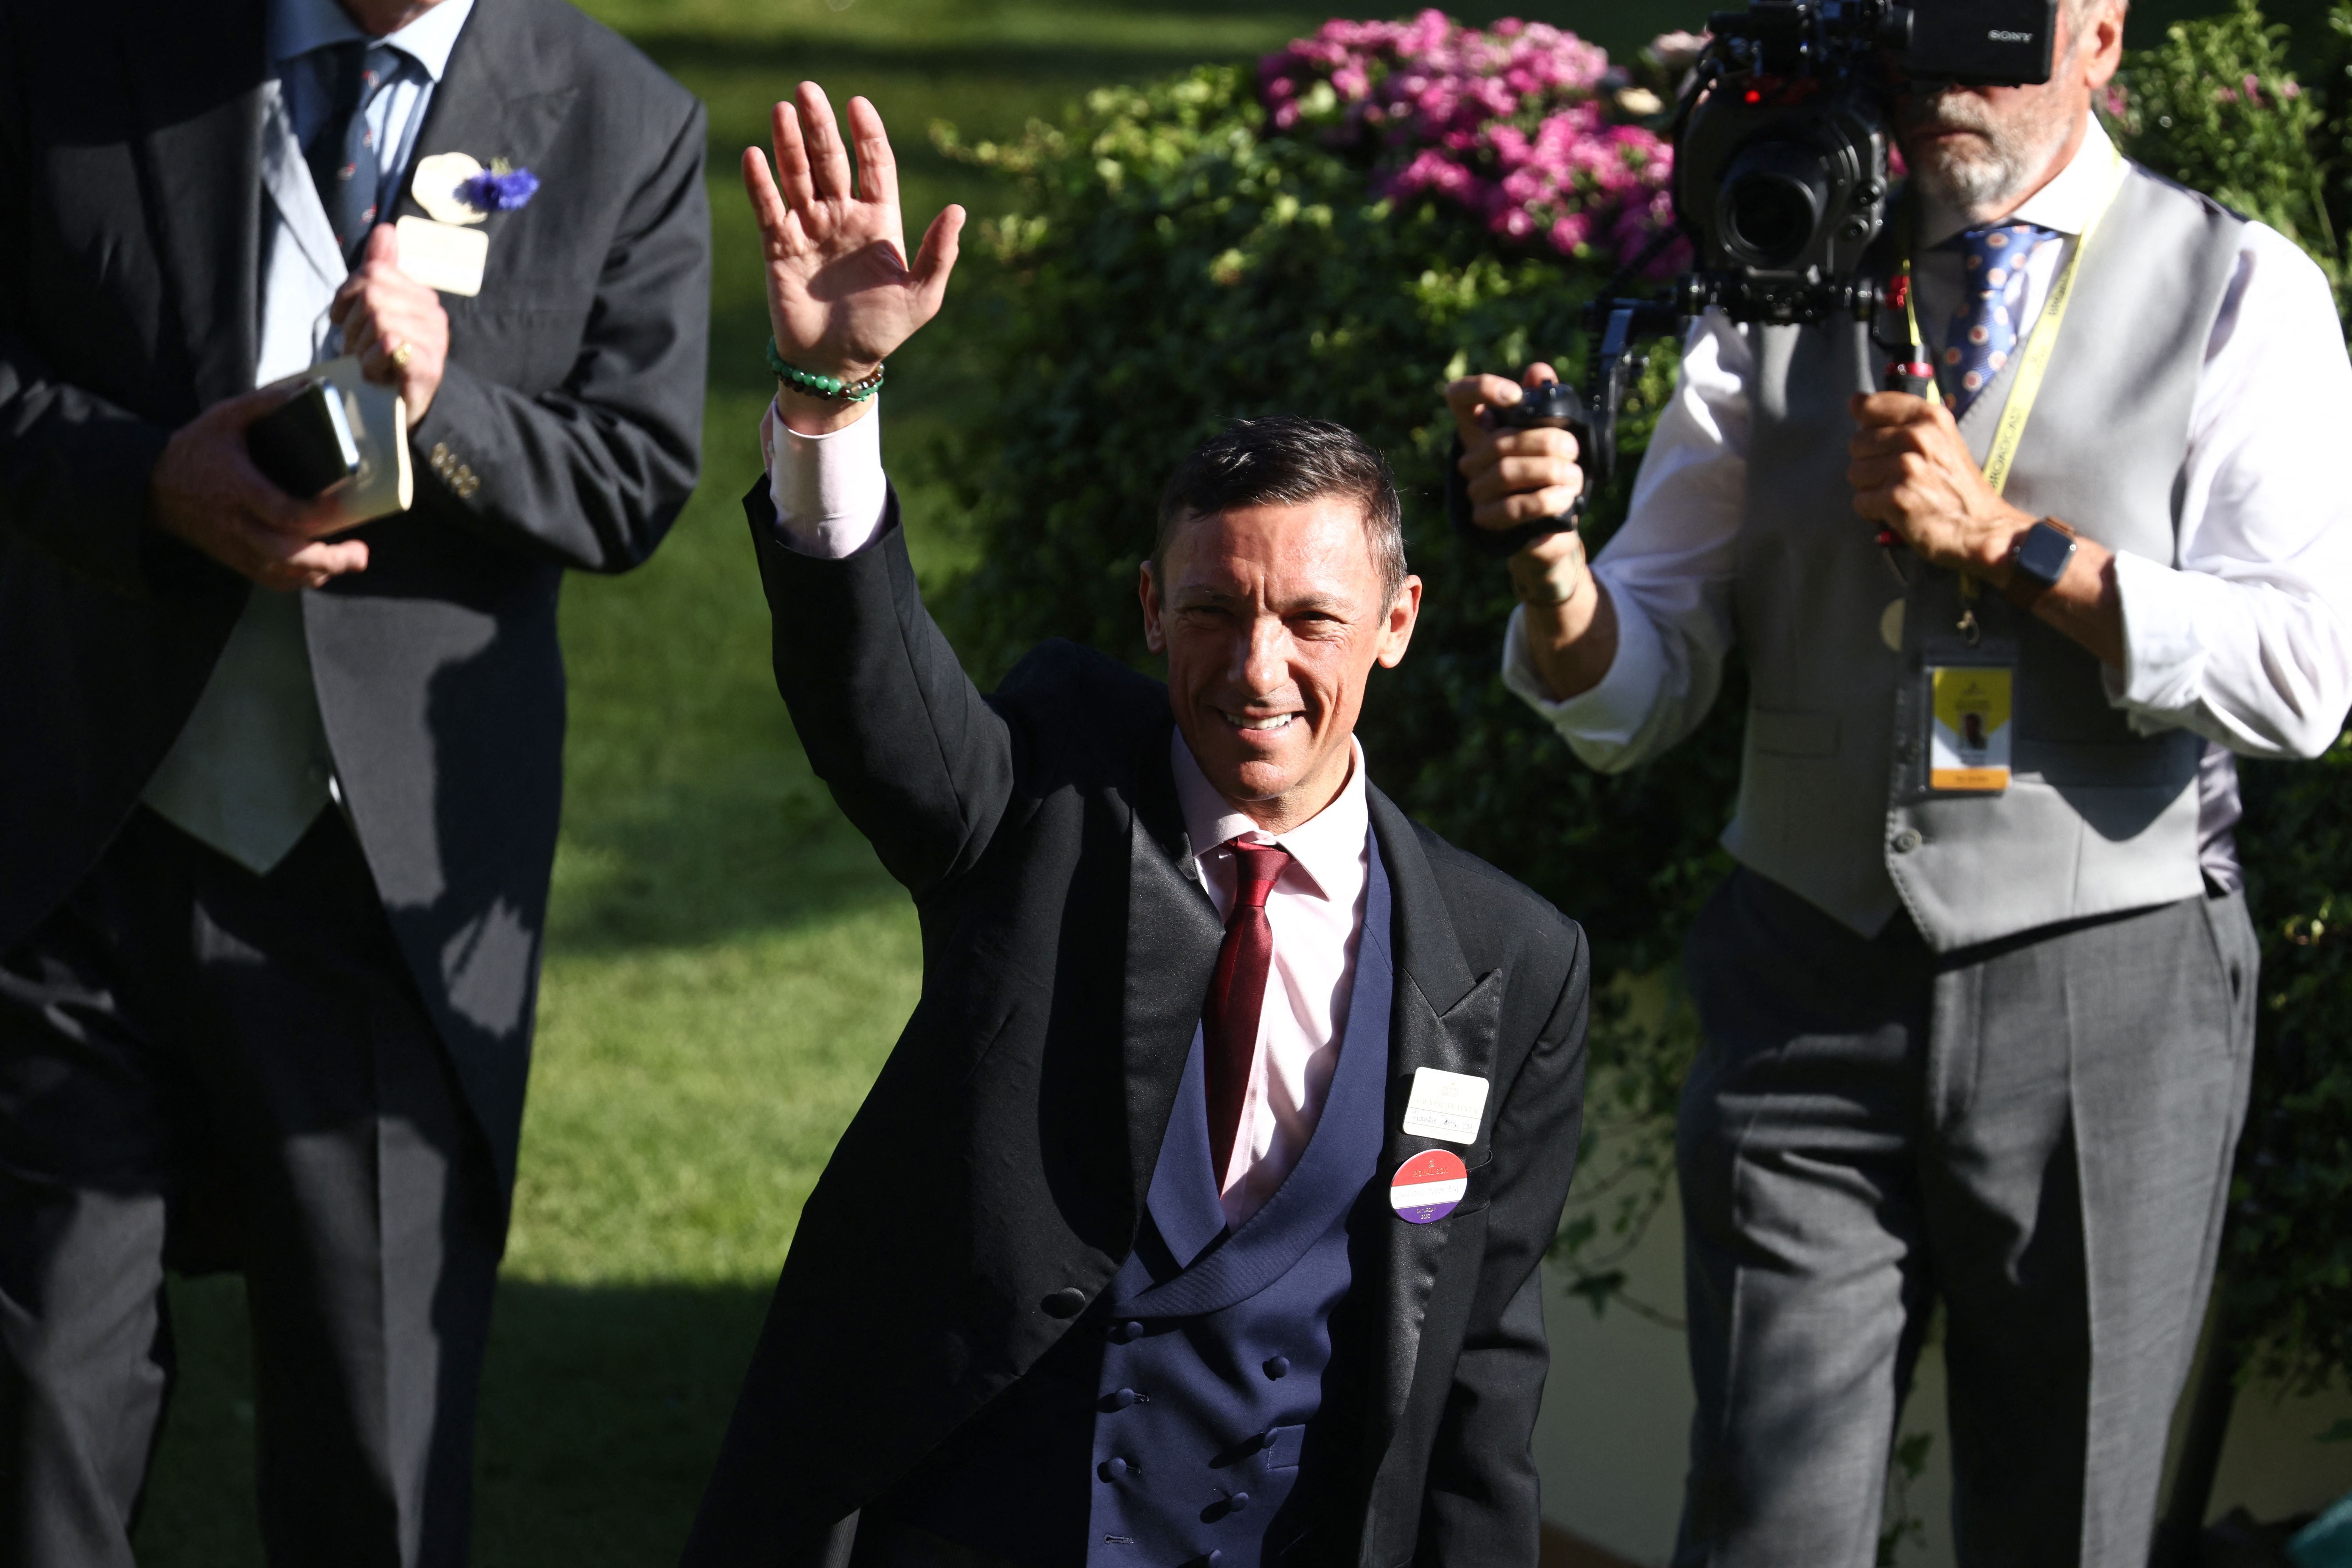 Frankie Dettori waves to the crowd after his last Royal Ascot ride